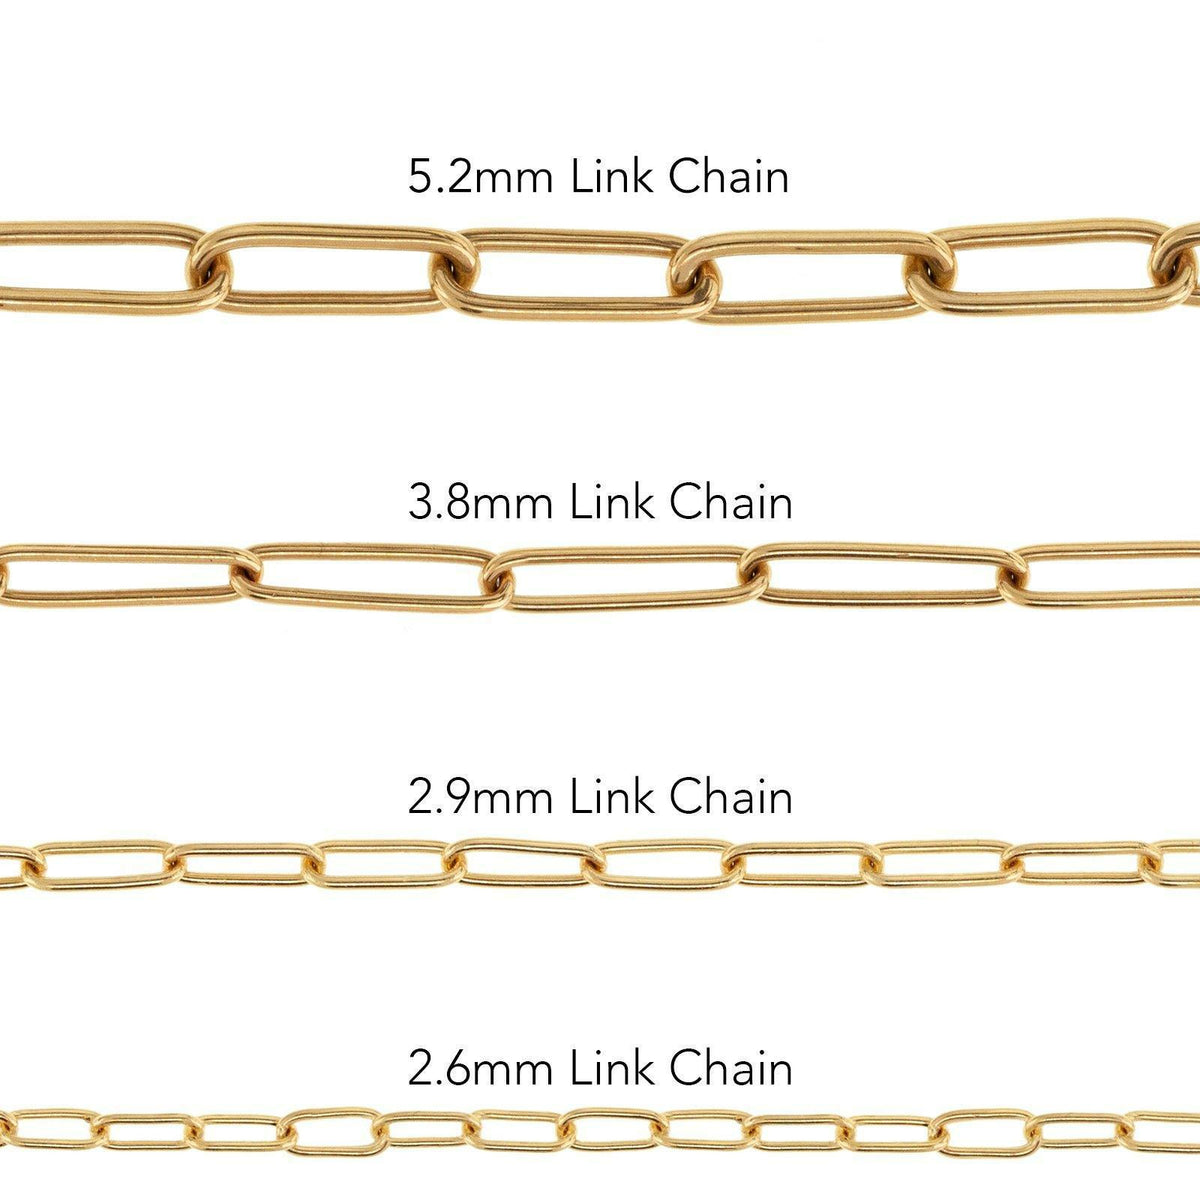 5.2mm Gold Link Carabiner Chain